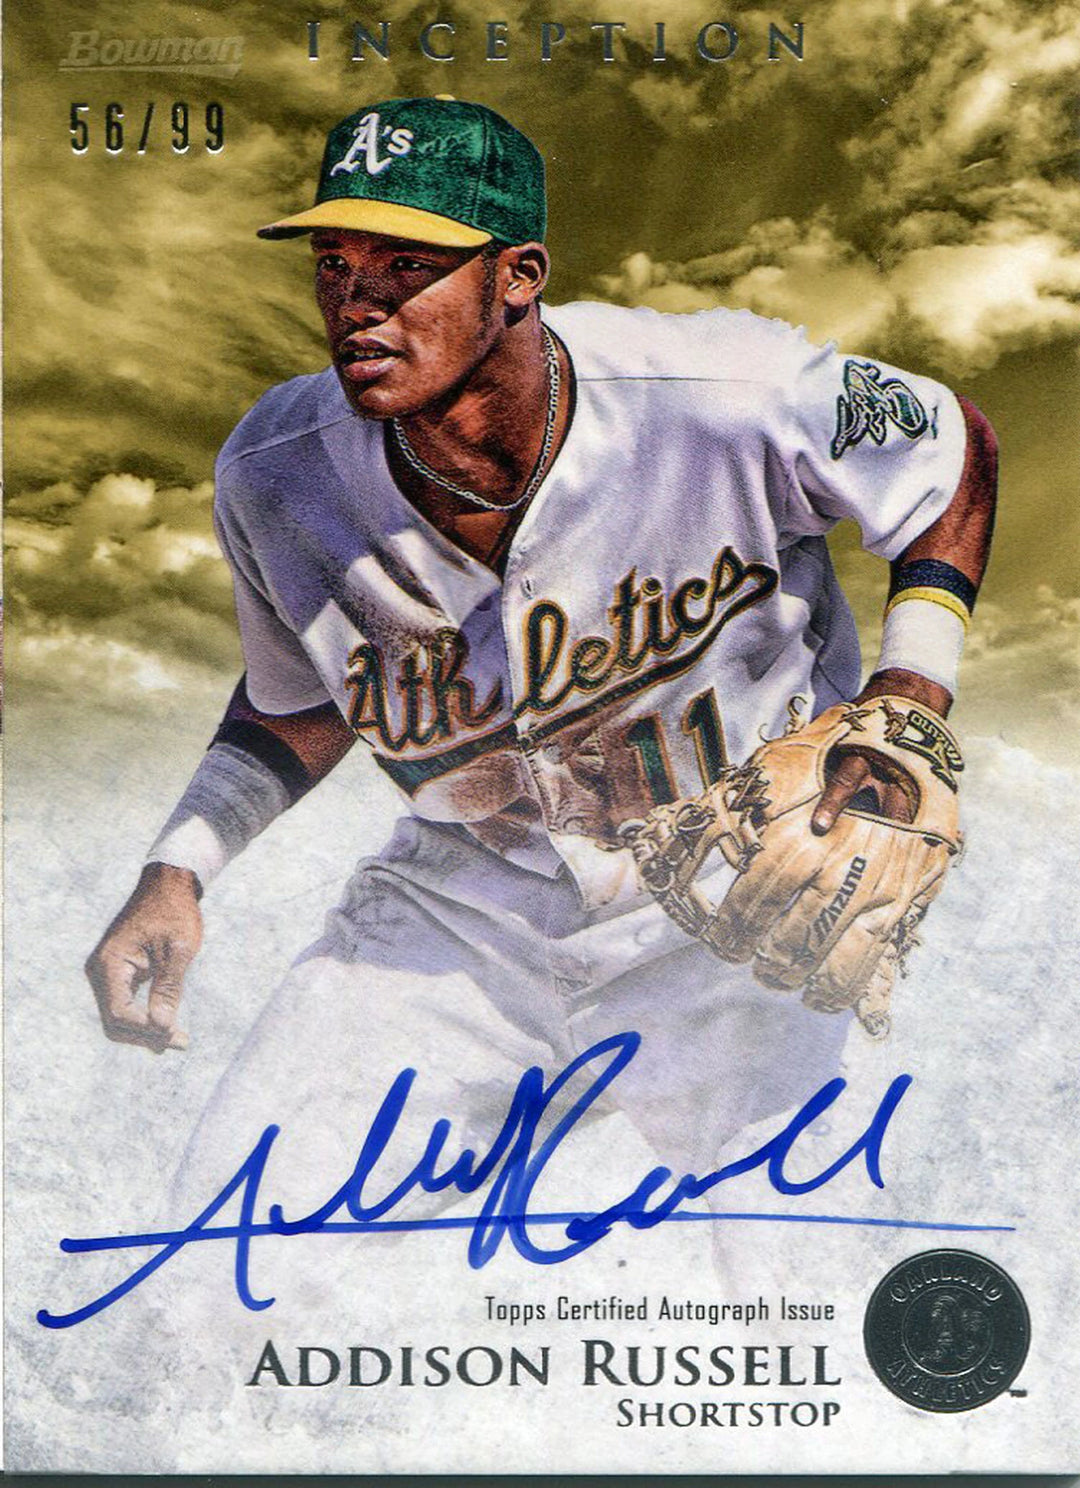 Addison Russell Autographed 2013 Bowman Inception Card Image 1